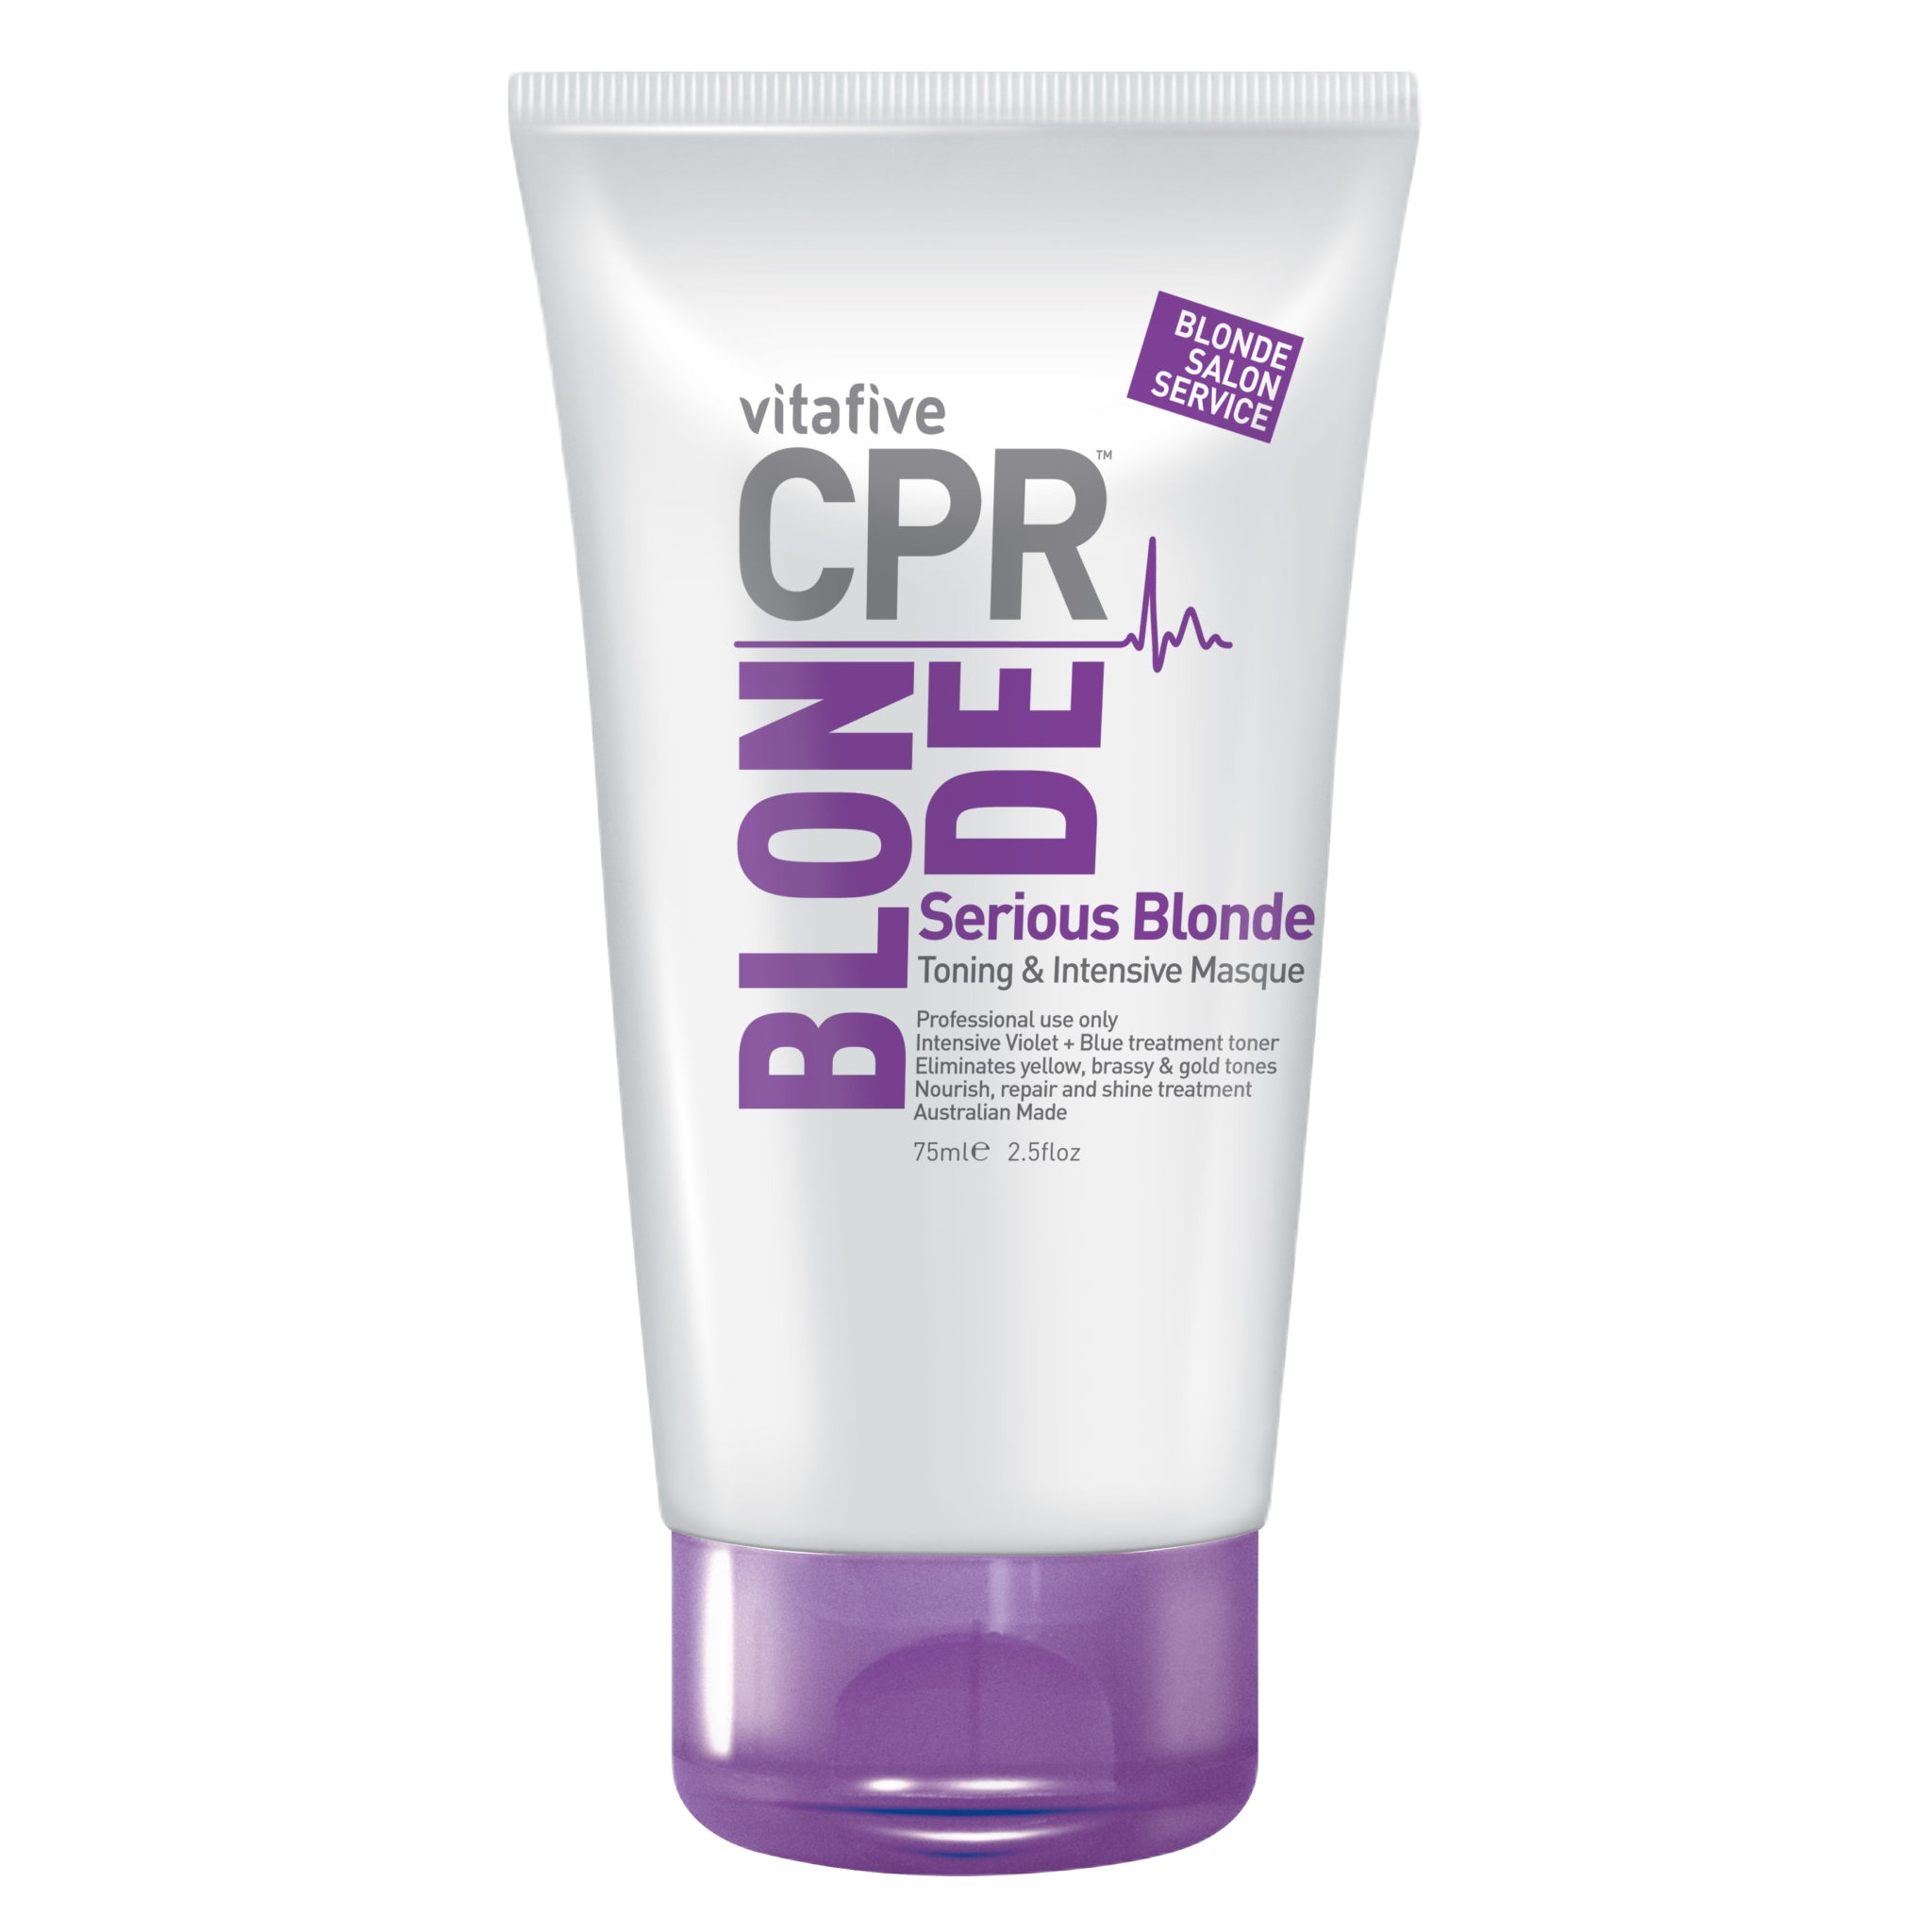 CPR Serious Blonde Intensive Masque 75mL